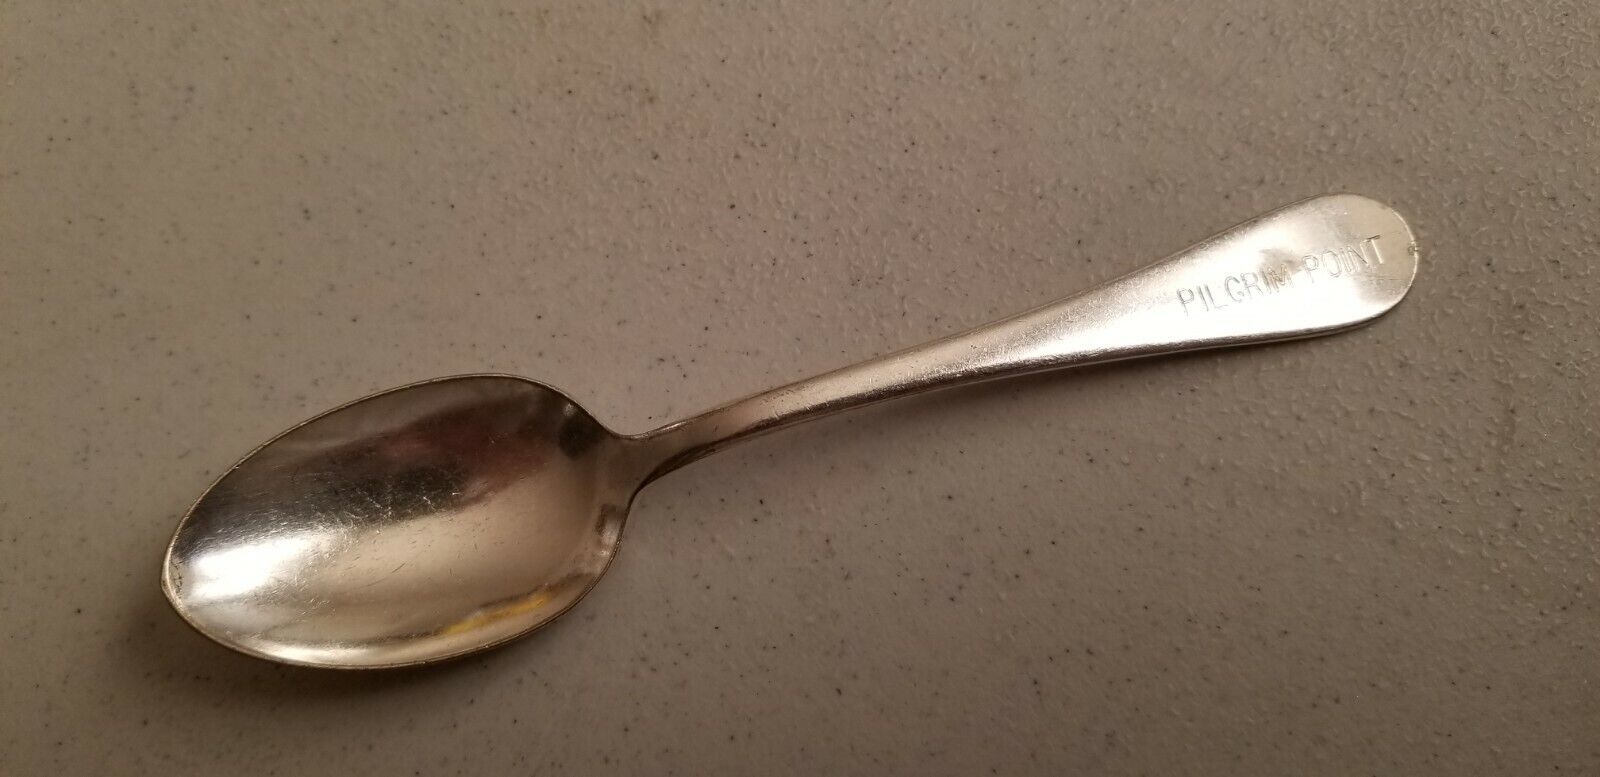 ANTIQUE COLLECTIBLE SPOON 6" H&T MFG CO. SILVER PLATE - PILGRIM POINT